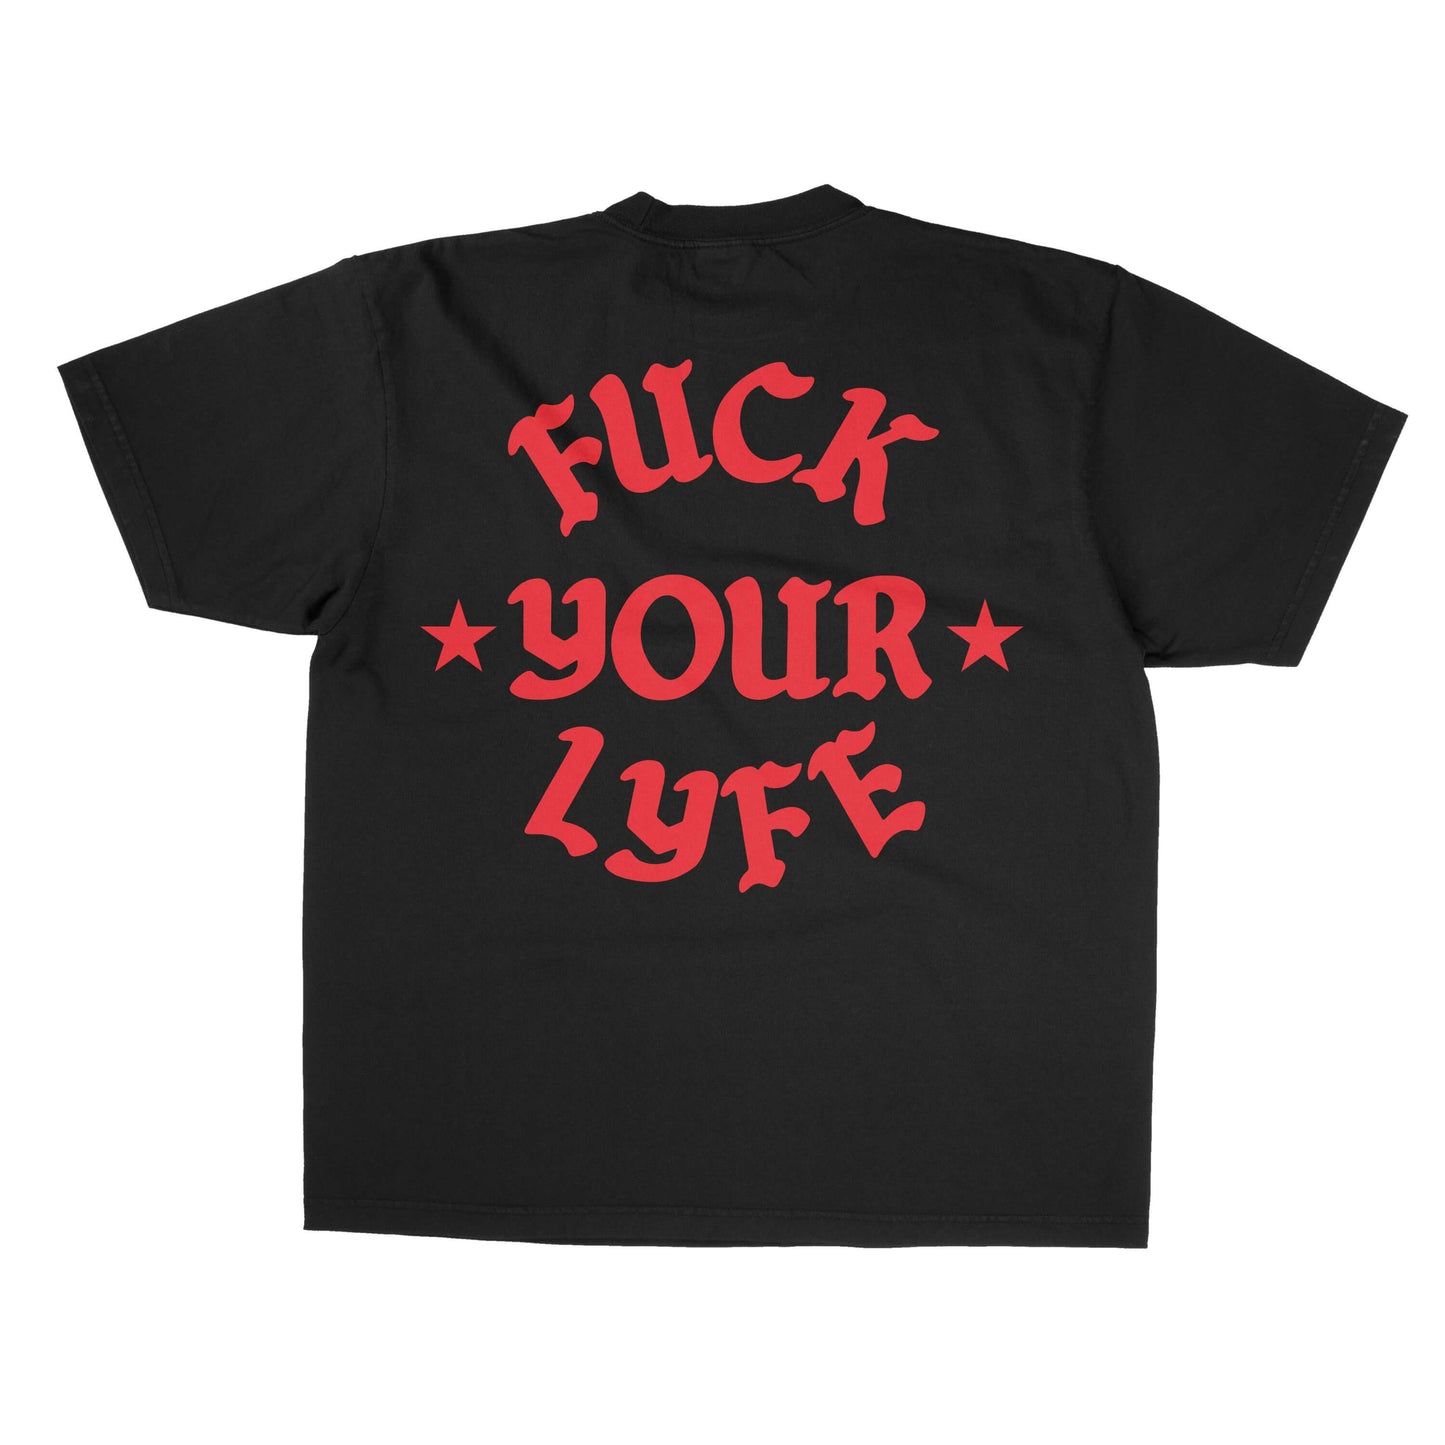 WILDSTYLE T-SHIRT (Black or Red)